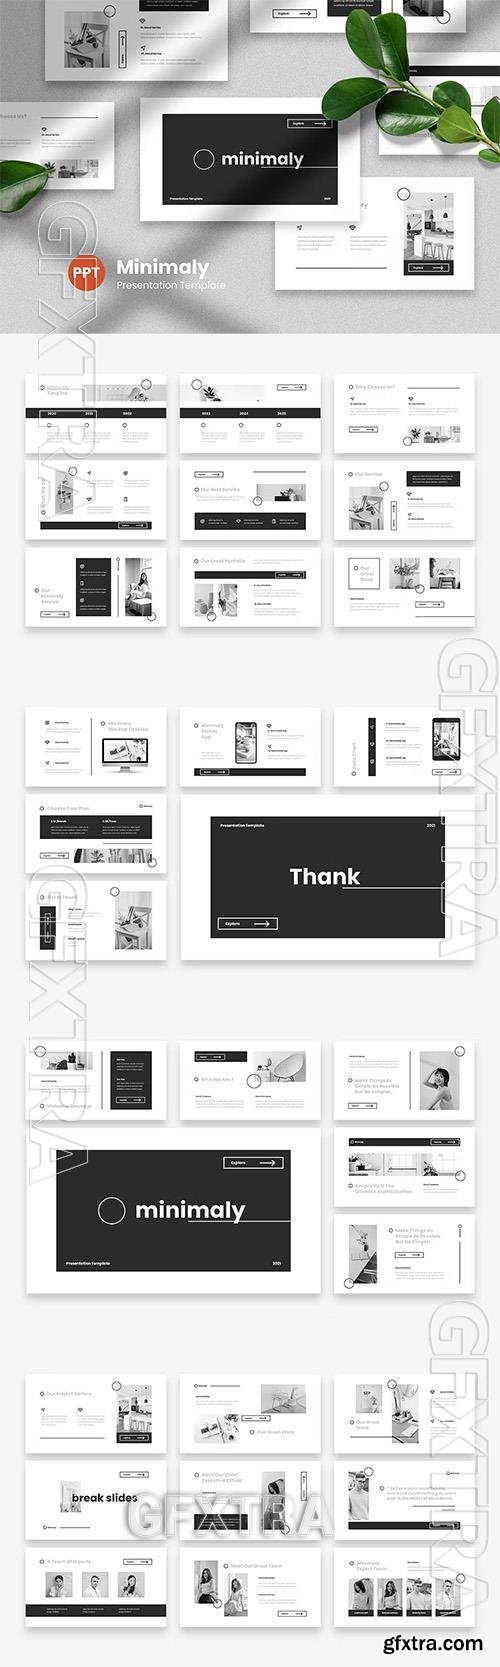 Minimaly - Black & White PowerPoint Template HLR2D2X